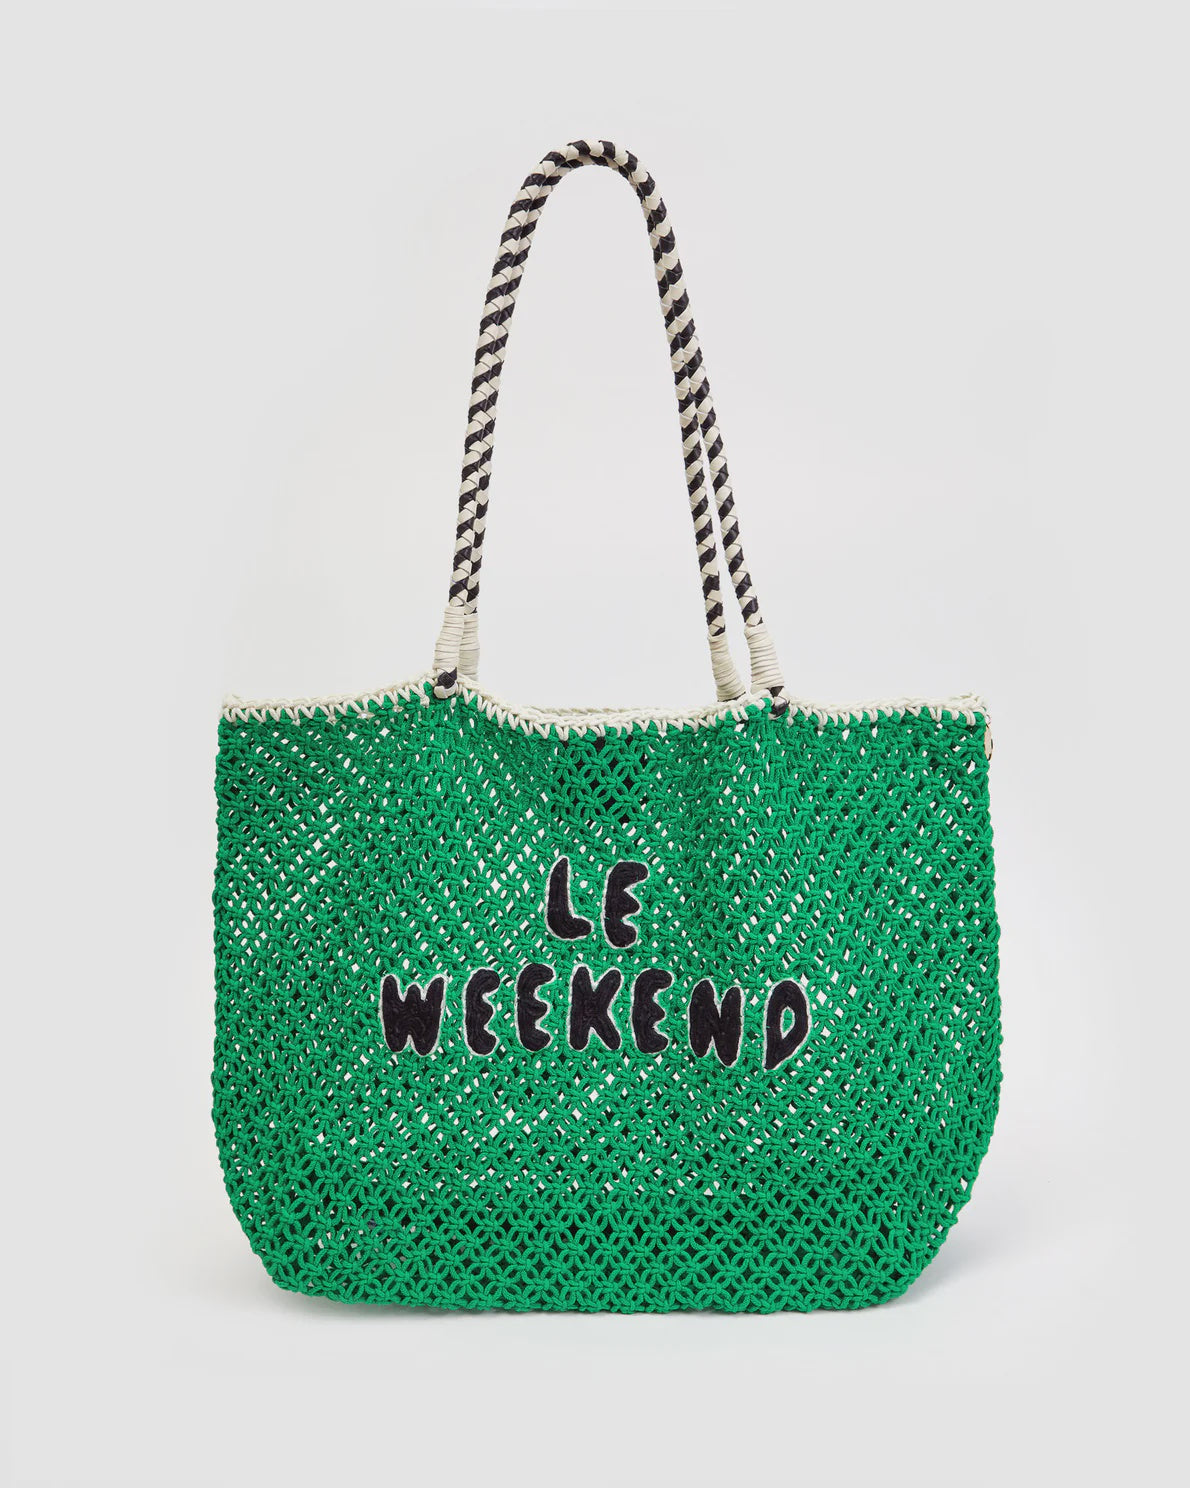 A green woven Lete Tote from Clare Vivier with black and white striped handles, perfect for a summer outing. The bag features the phrase "LE WEEKEND" in black, embroidered letters on the front, offering a chic look against the white background. Crafted with attention to detail, it’s ideal for your weekend adventures.